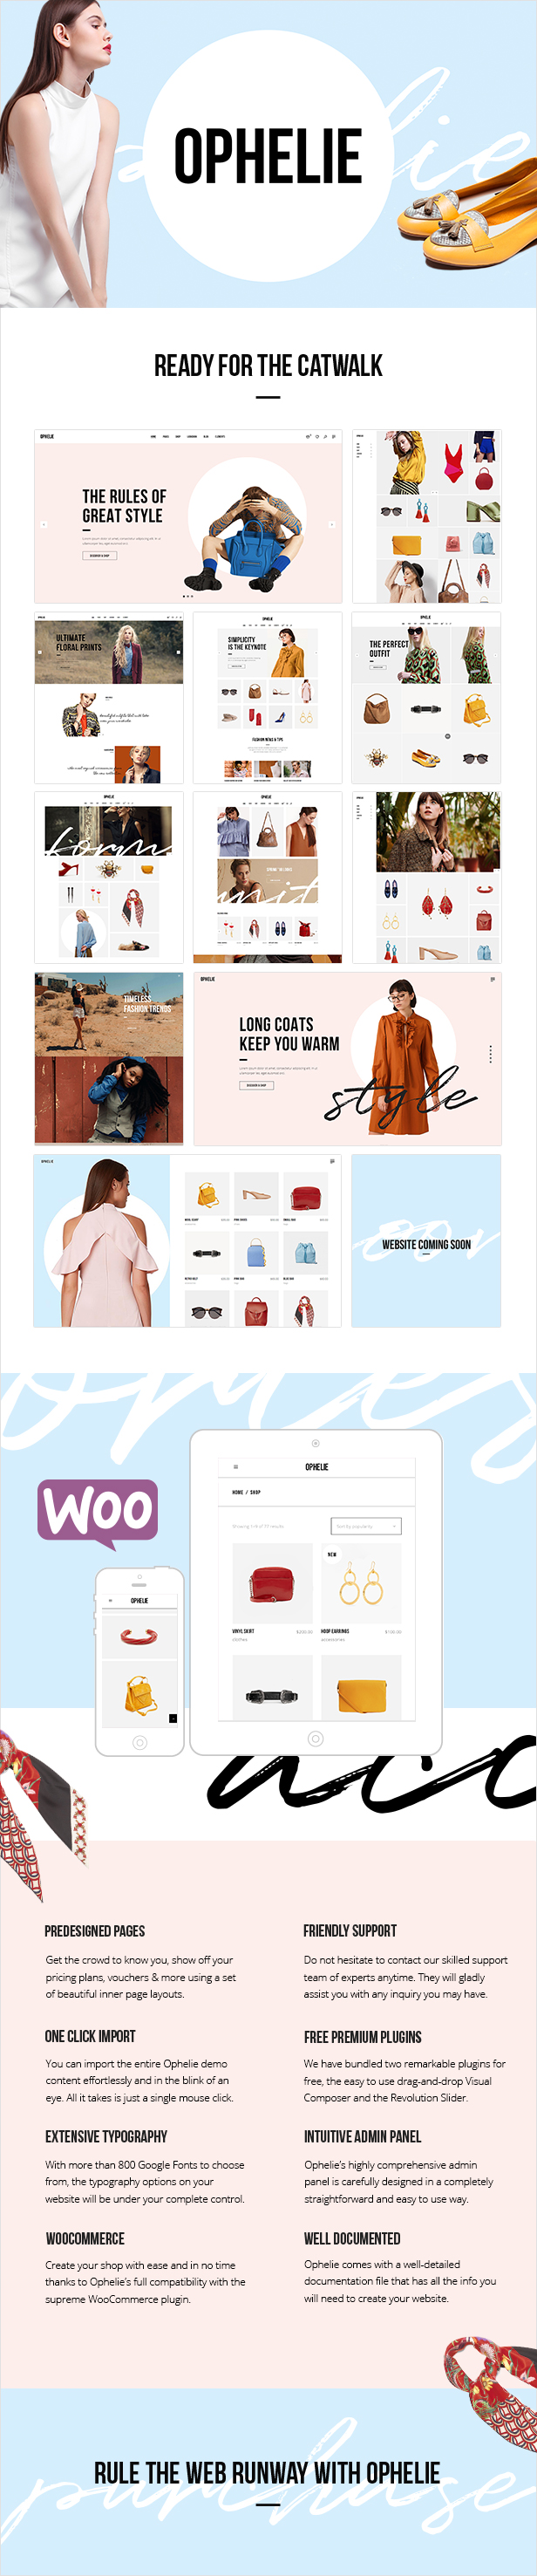 Ophelie - WooCommerce Theme for Fashion Shops, Stores and Brands - 1